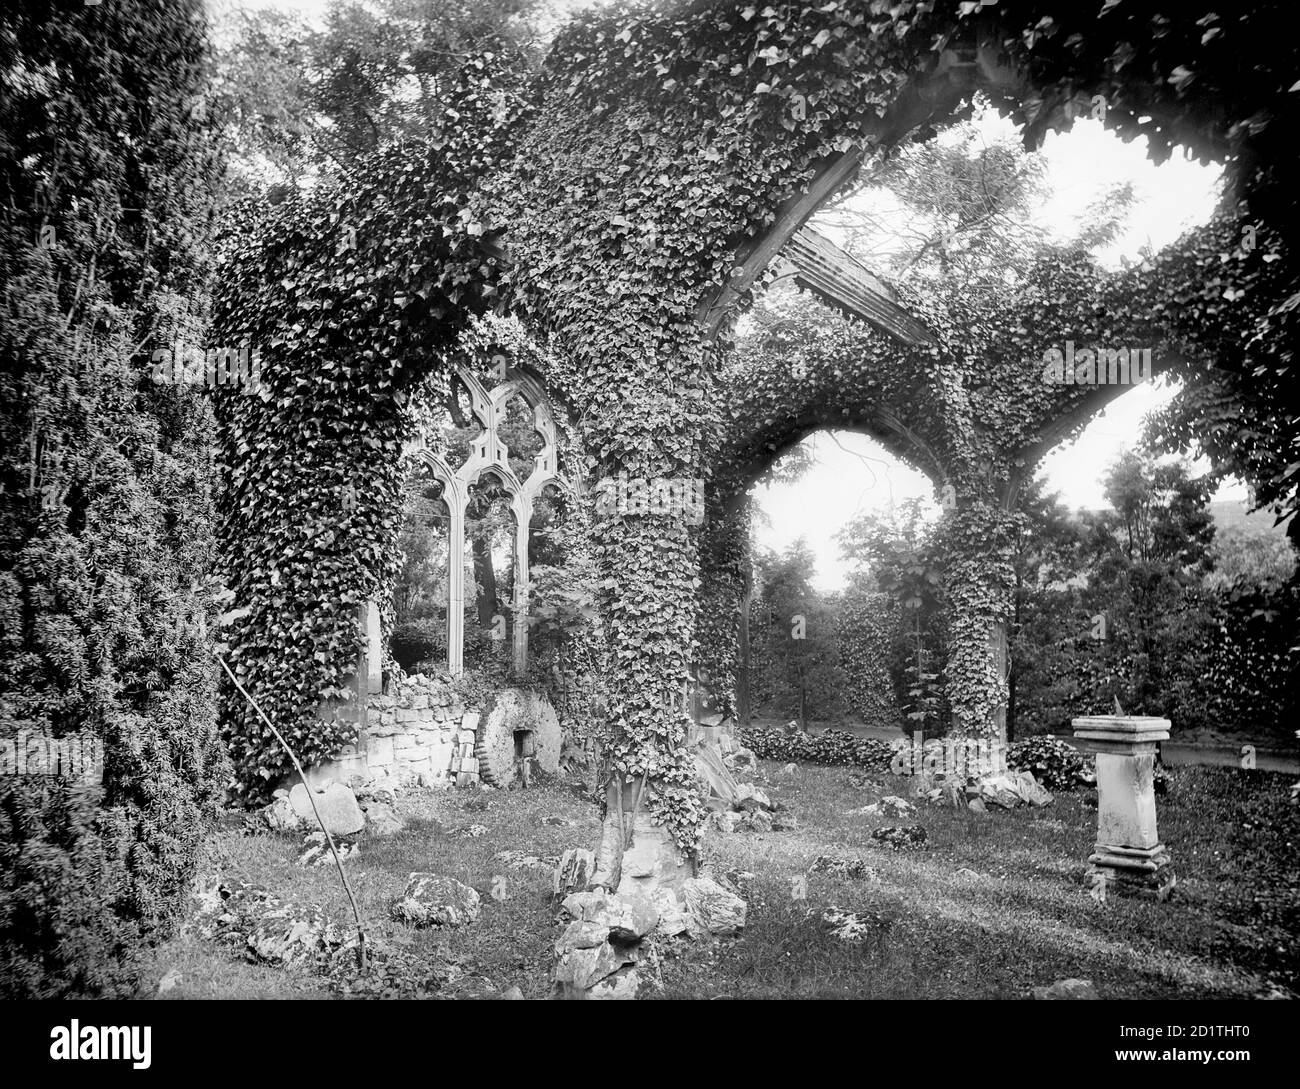 ABINGDON, Oxfordshire. Overgrown arcades and windows of the sham abbey ruin in the gardens of Abingdon Abbey. Photographed in 1892 by Henry W Taunt. Stock Photo